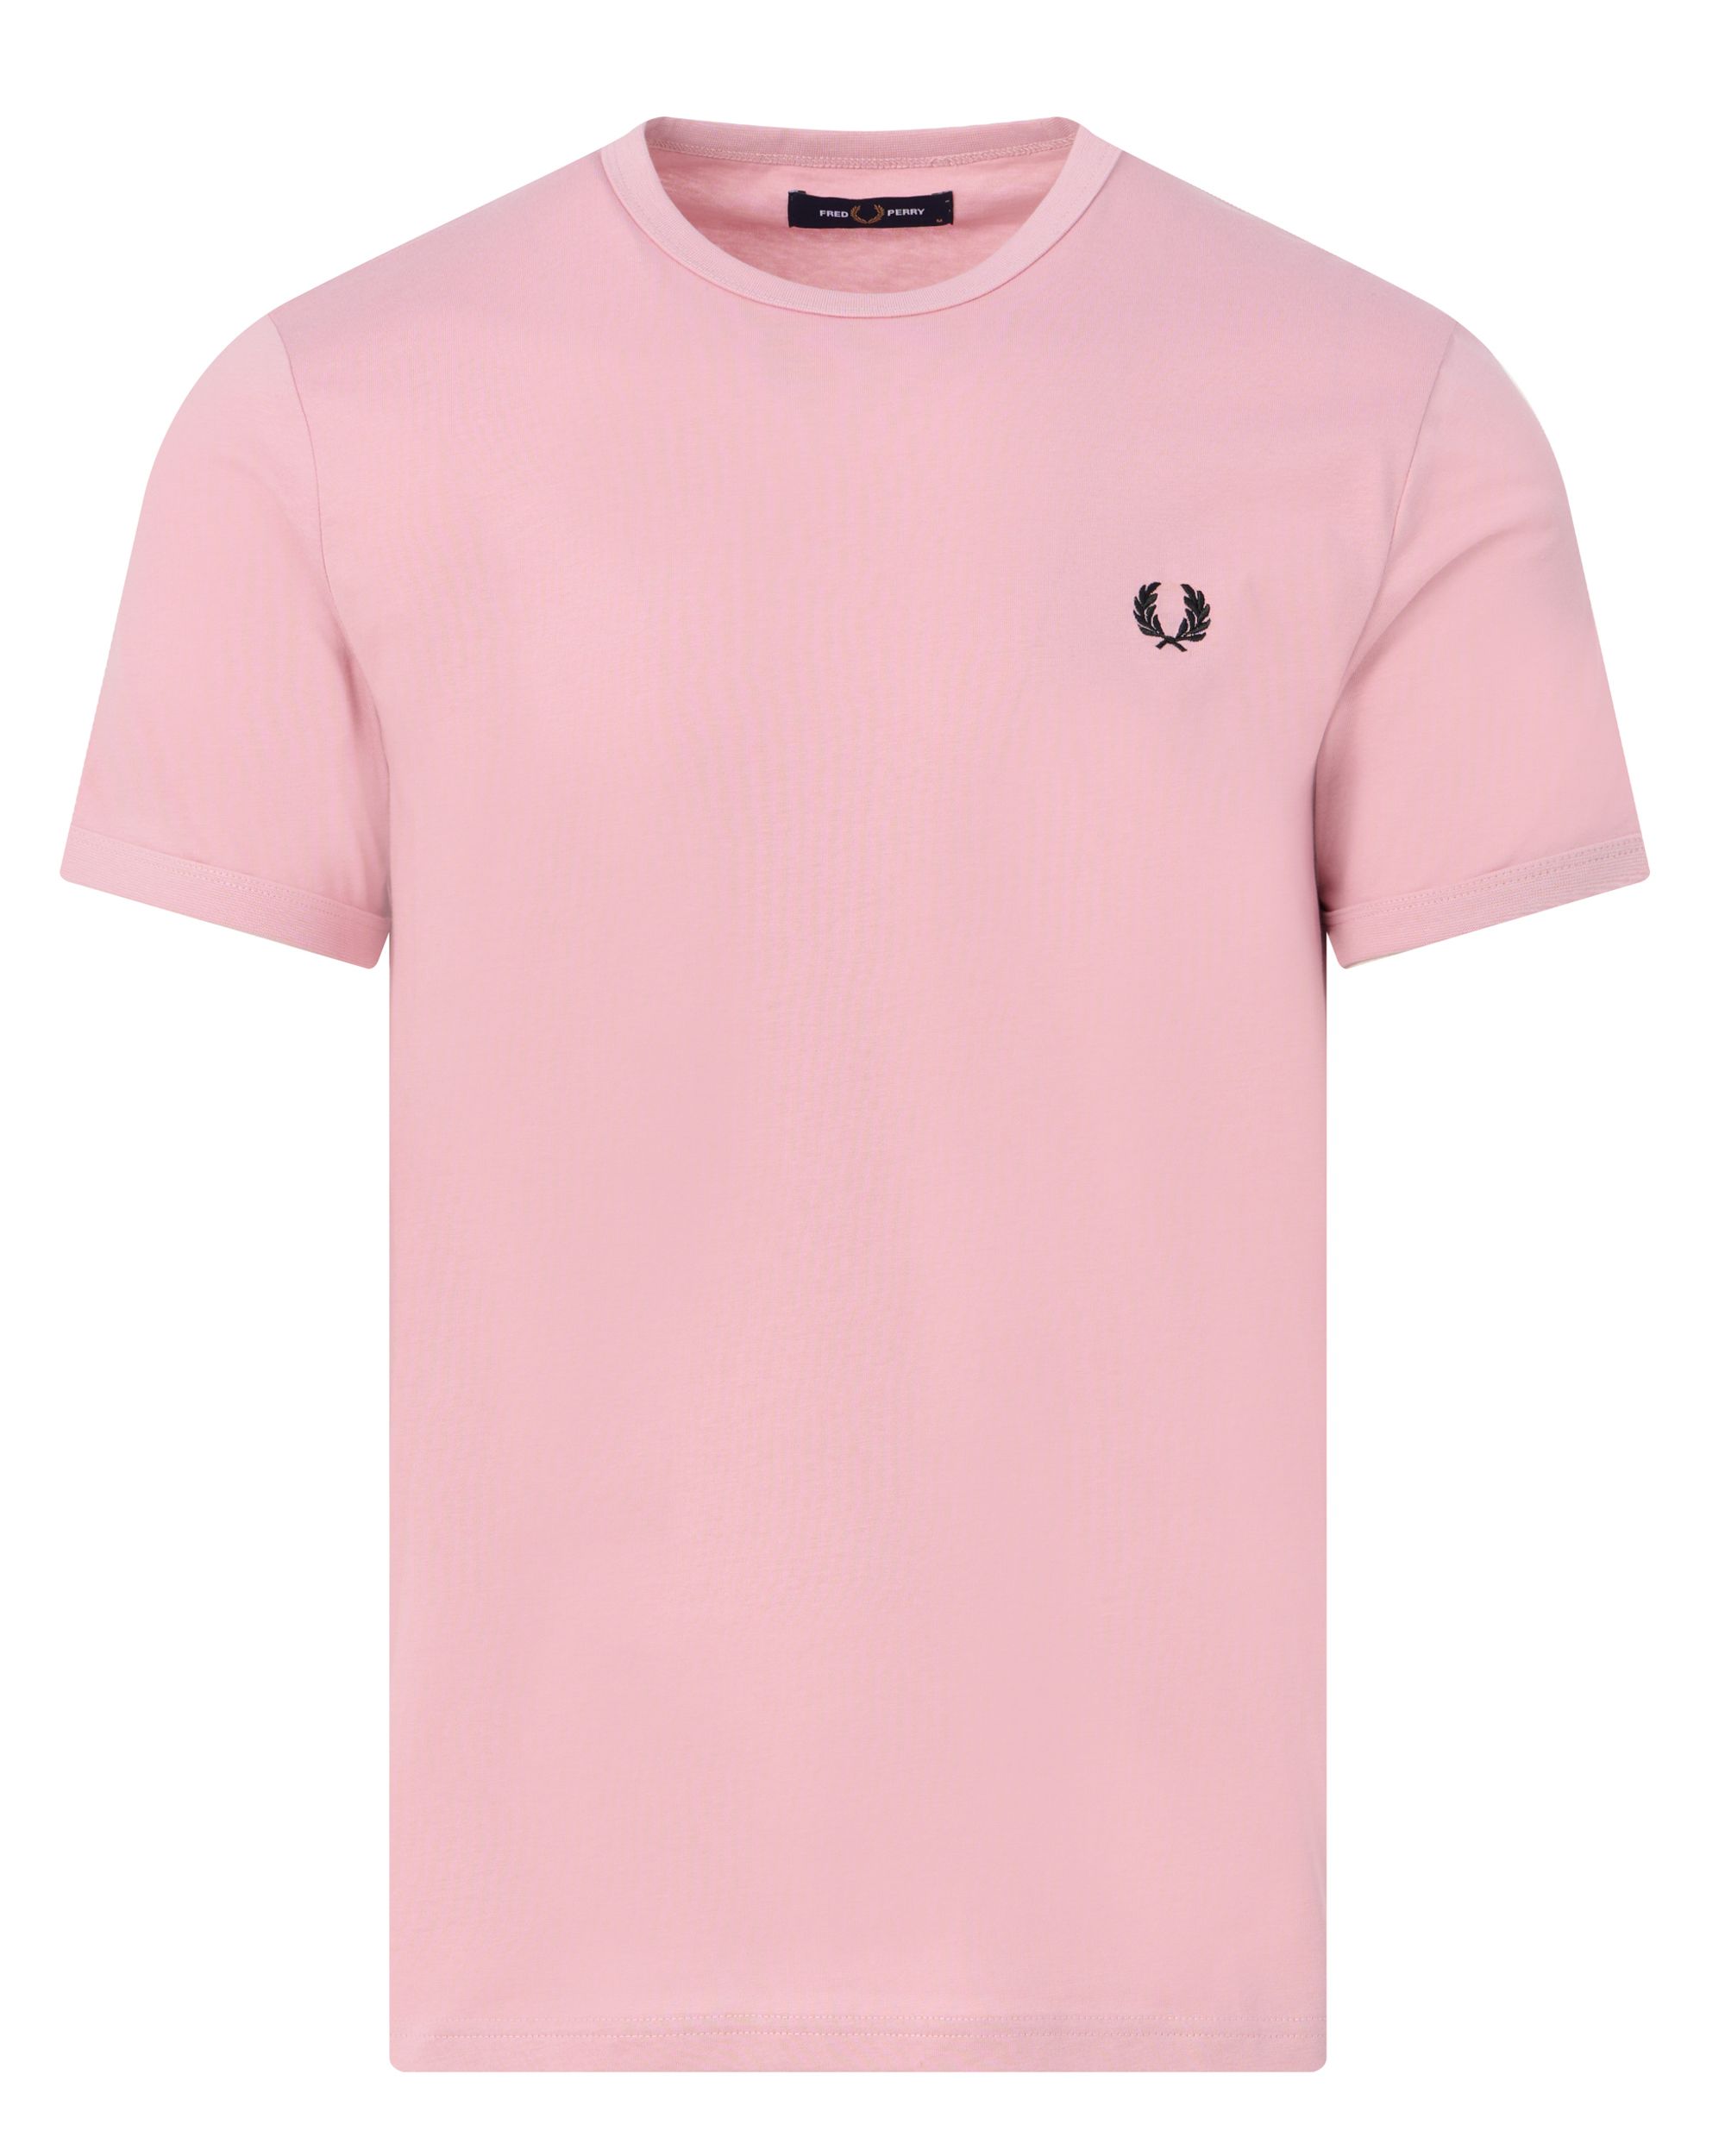 Fred Perry T-shirt KM Roze 083522-001-L